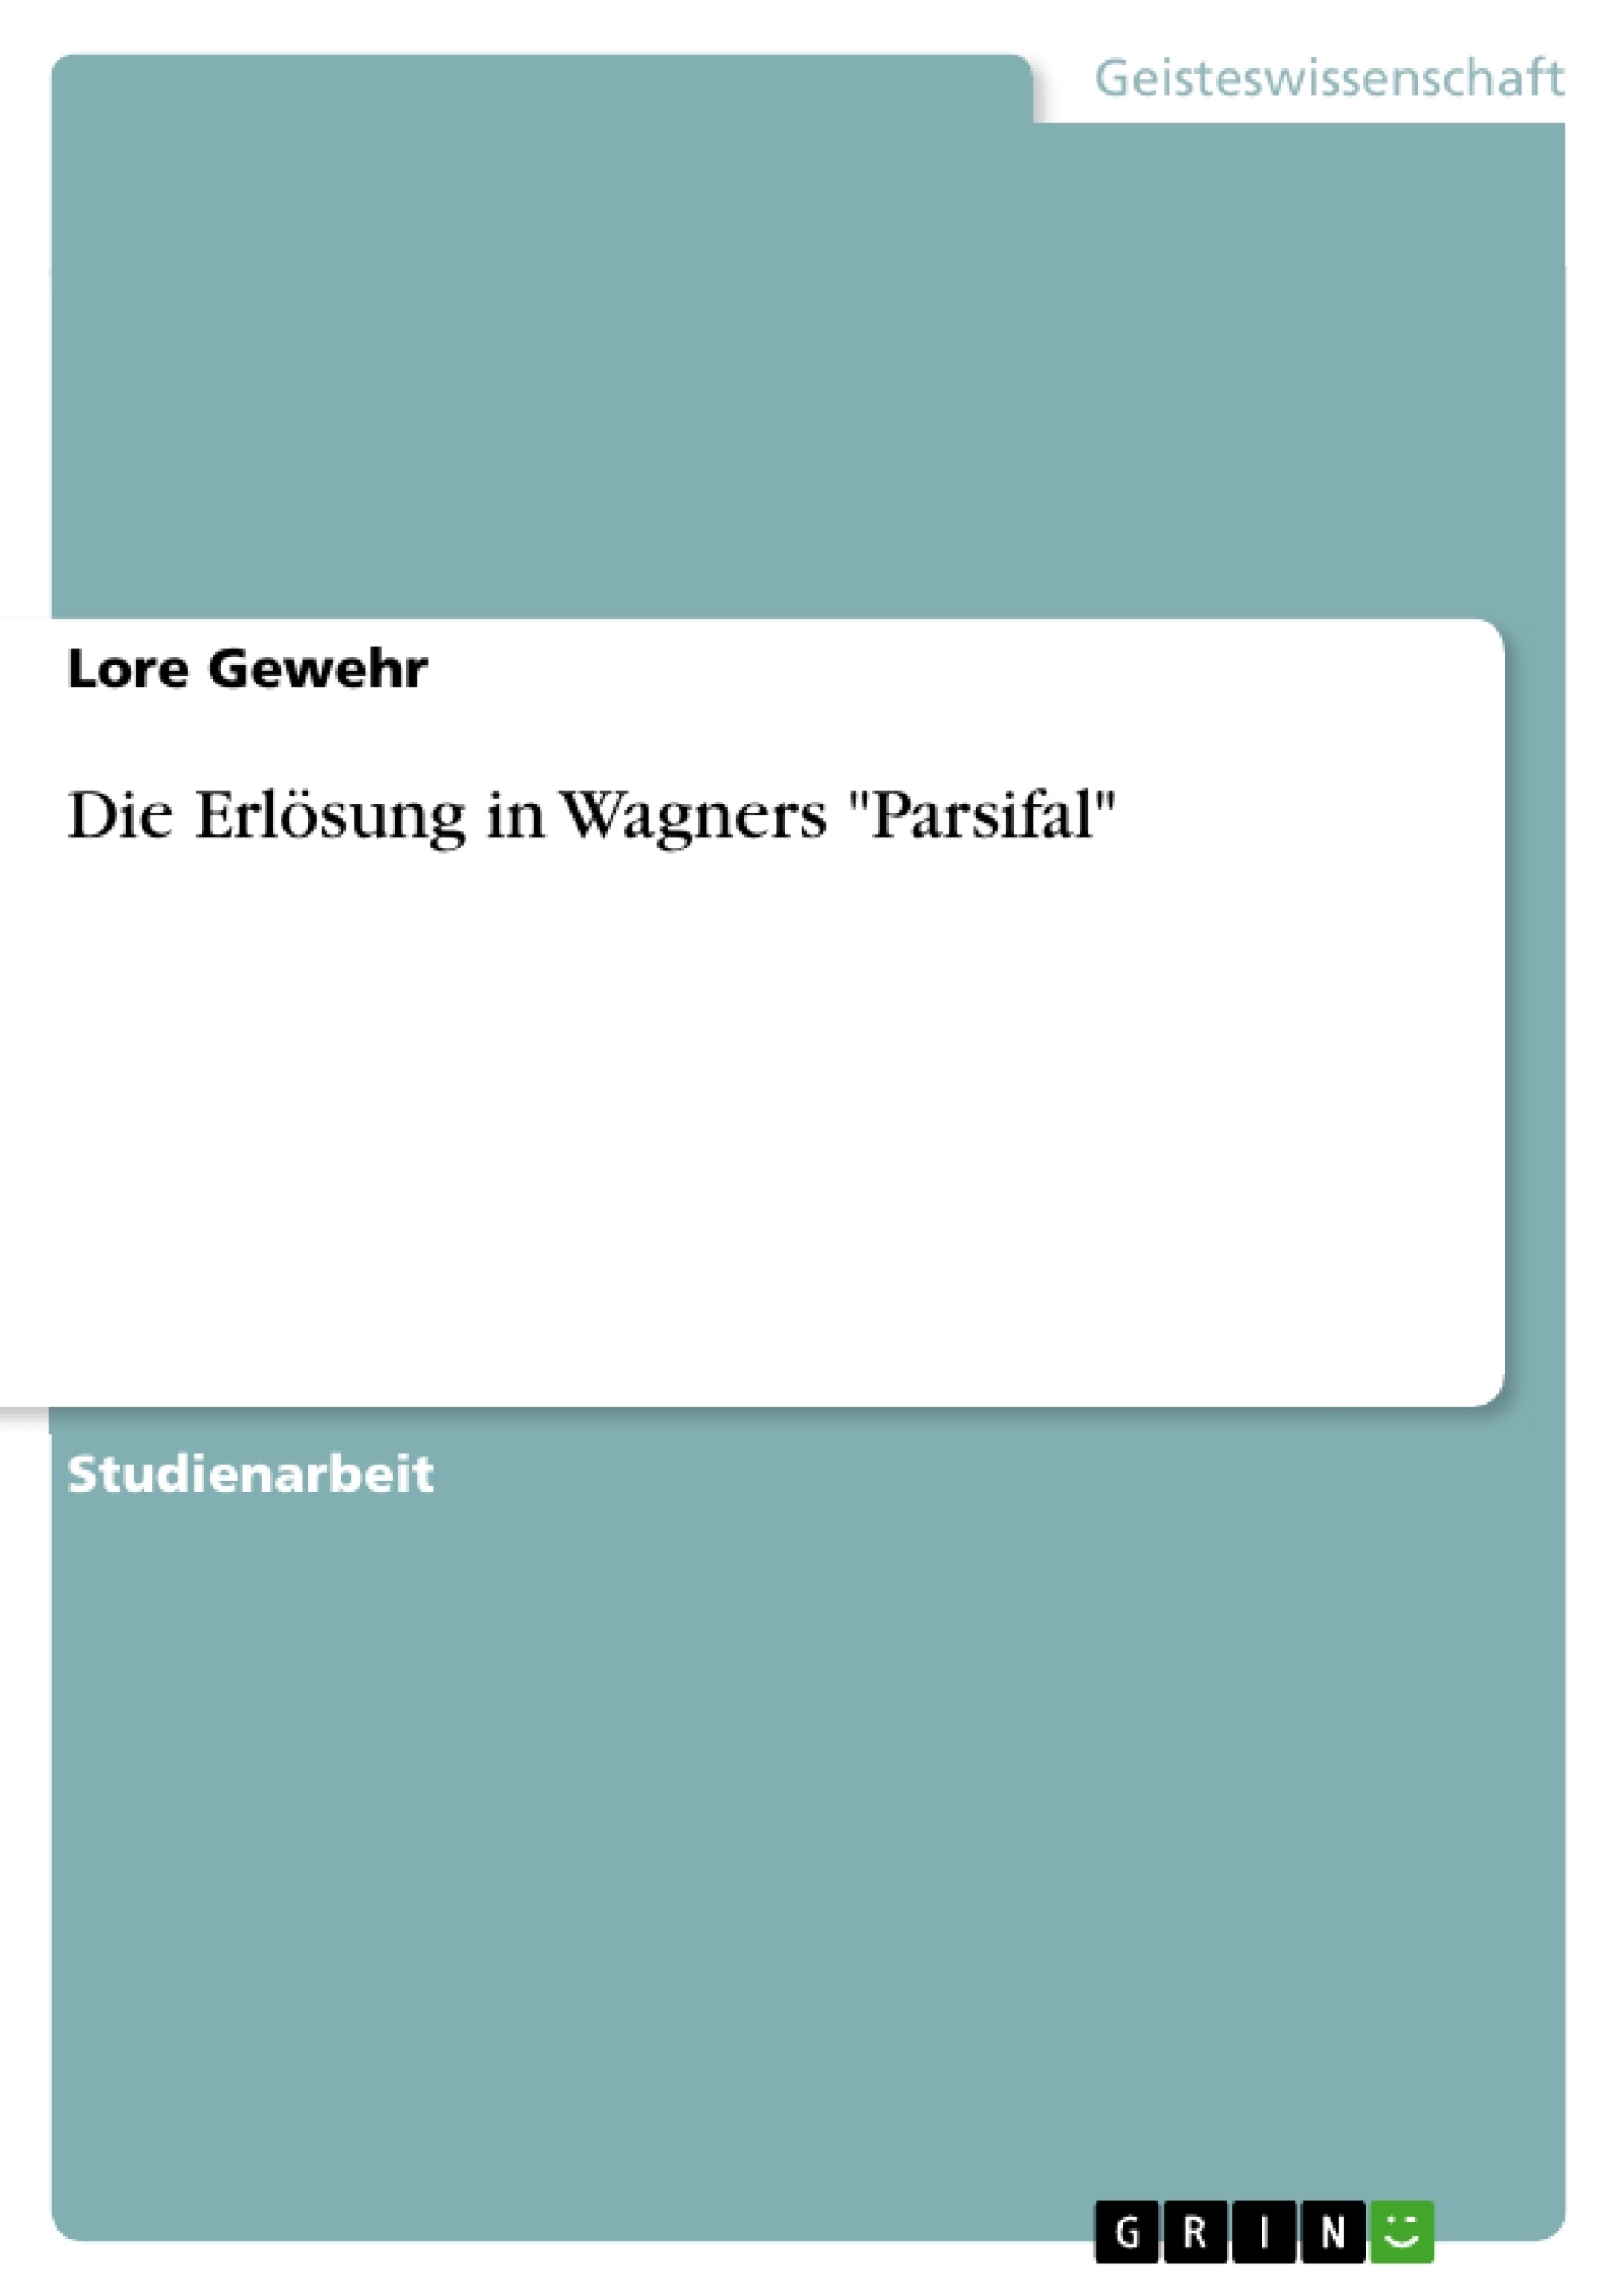 Titre: Die Erlösung in Wagners "Parsifal"